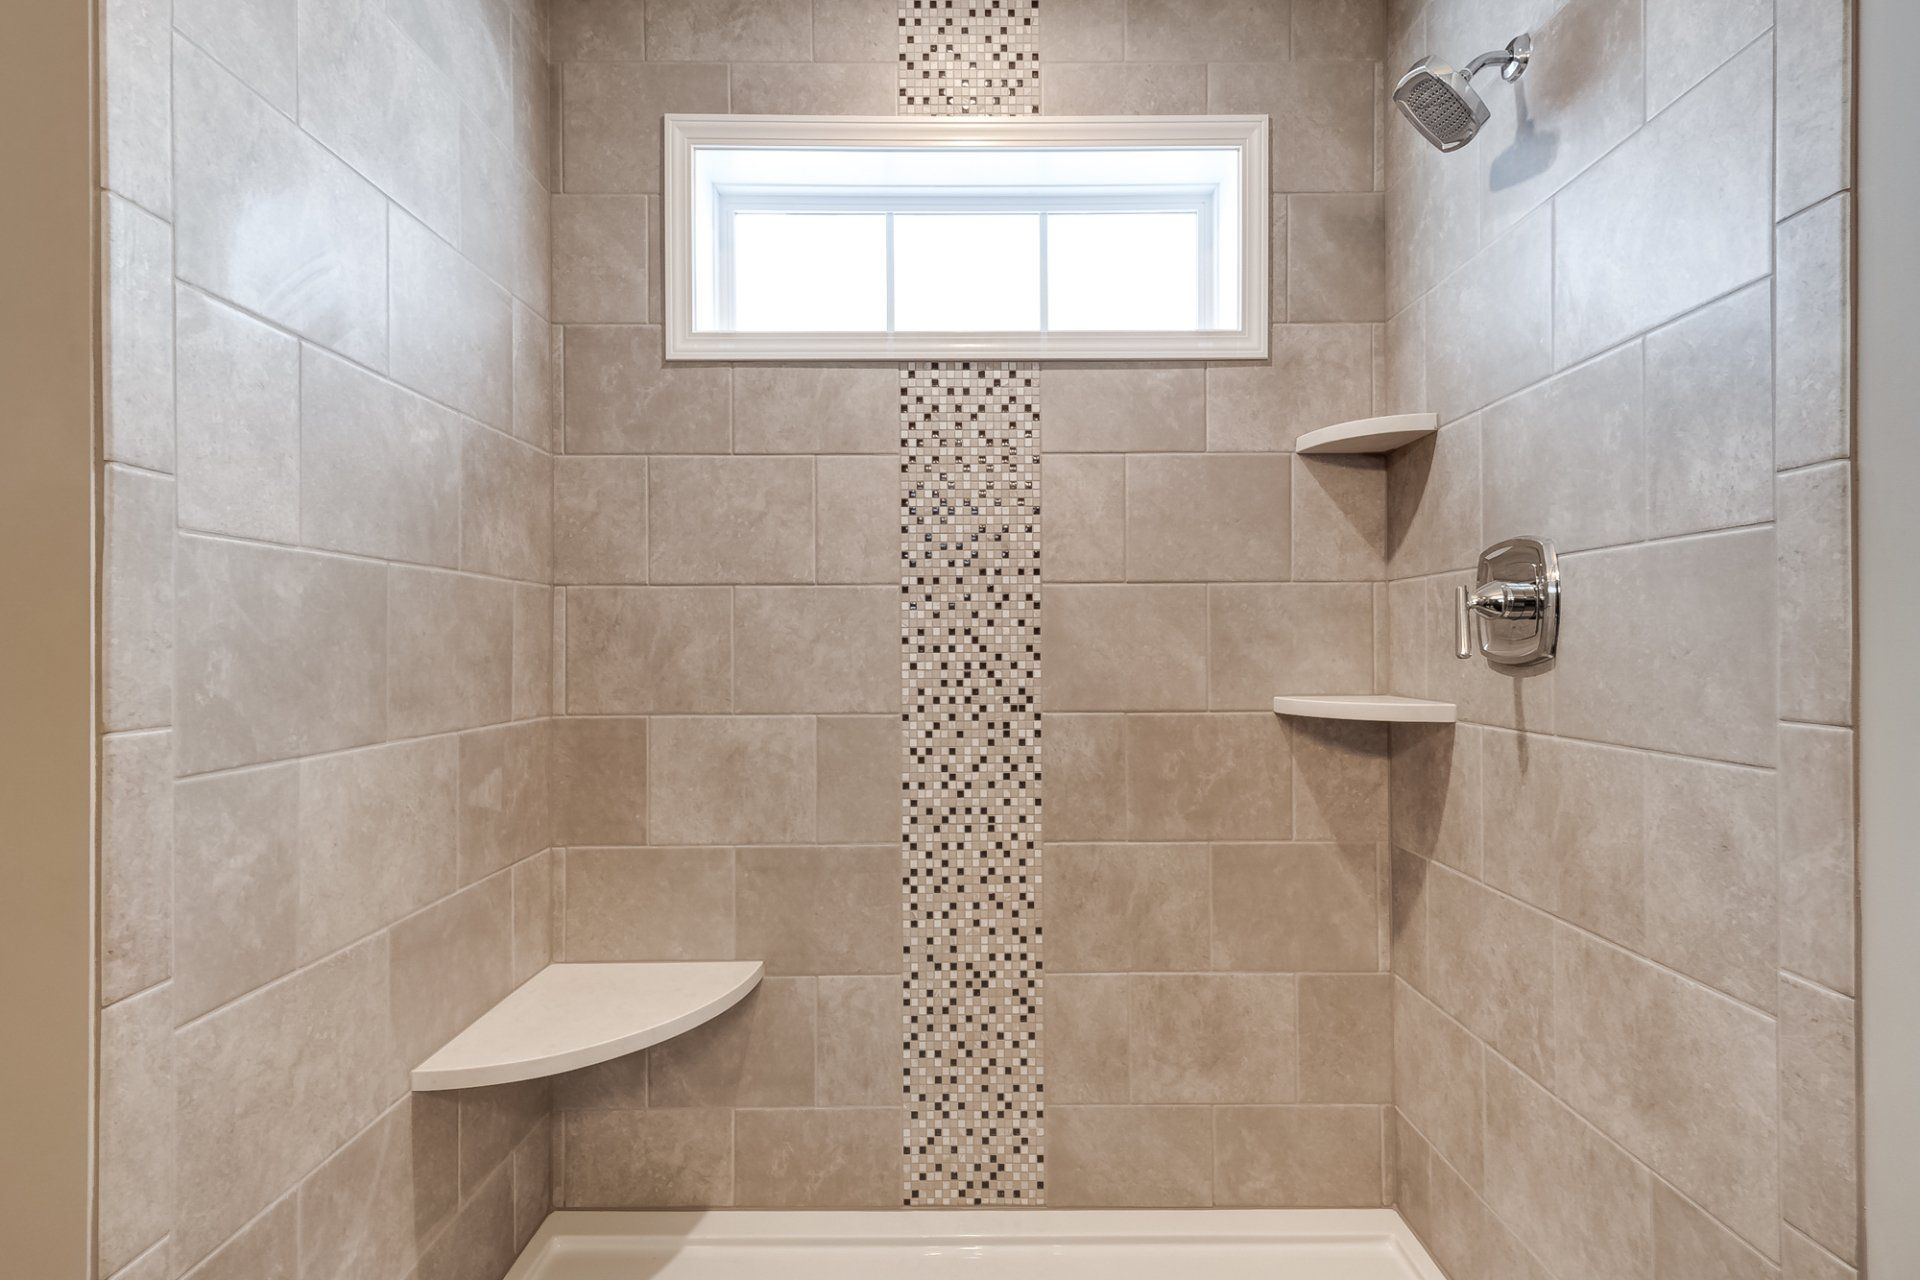 Walk-In Tile Shower with Built-In Bench and Shelves